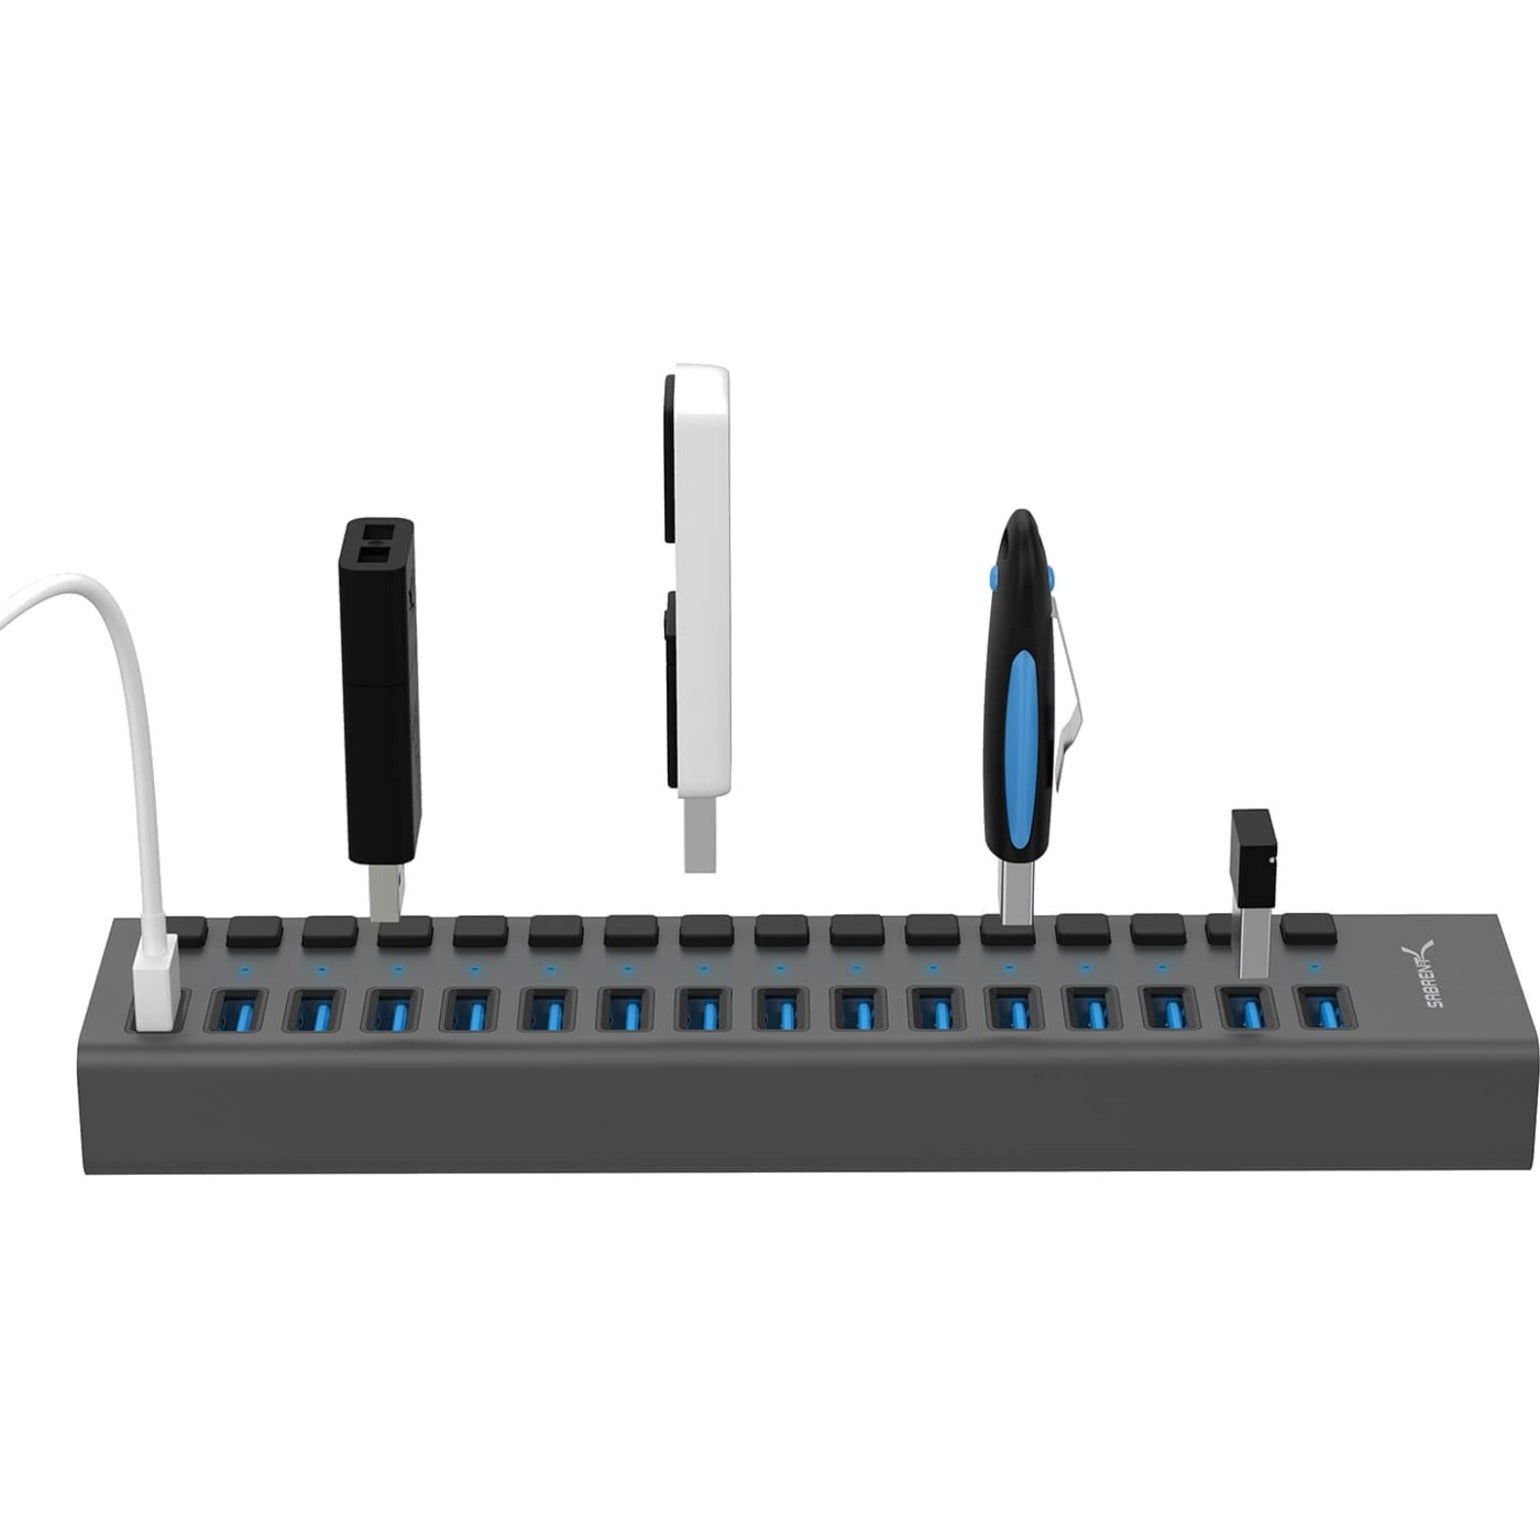 Sabrent HB-PU16 USB 3.0 16-Port Aluminum Hub with Power Switches and LEDs, 90 Watts Charging Capability